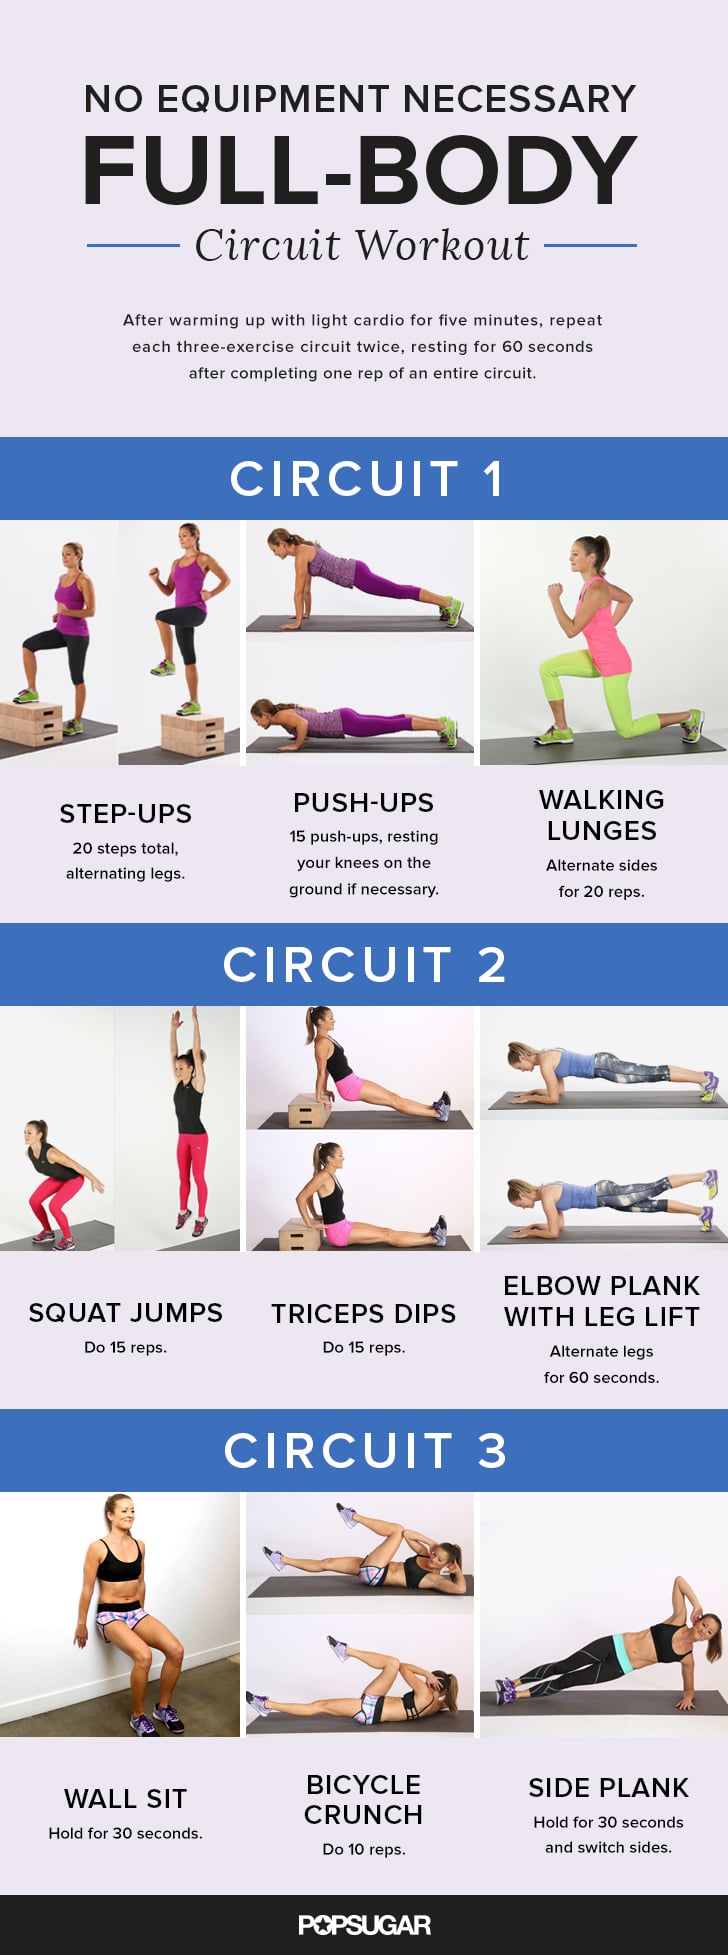 best-workout-posters-popsugar-fitness-photo-14